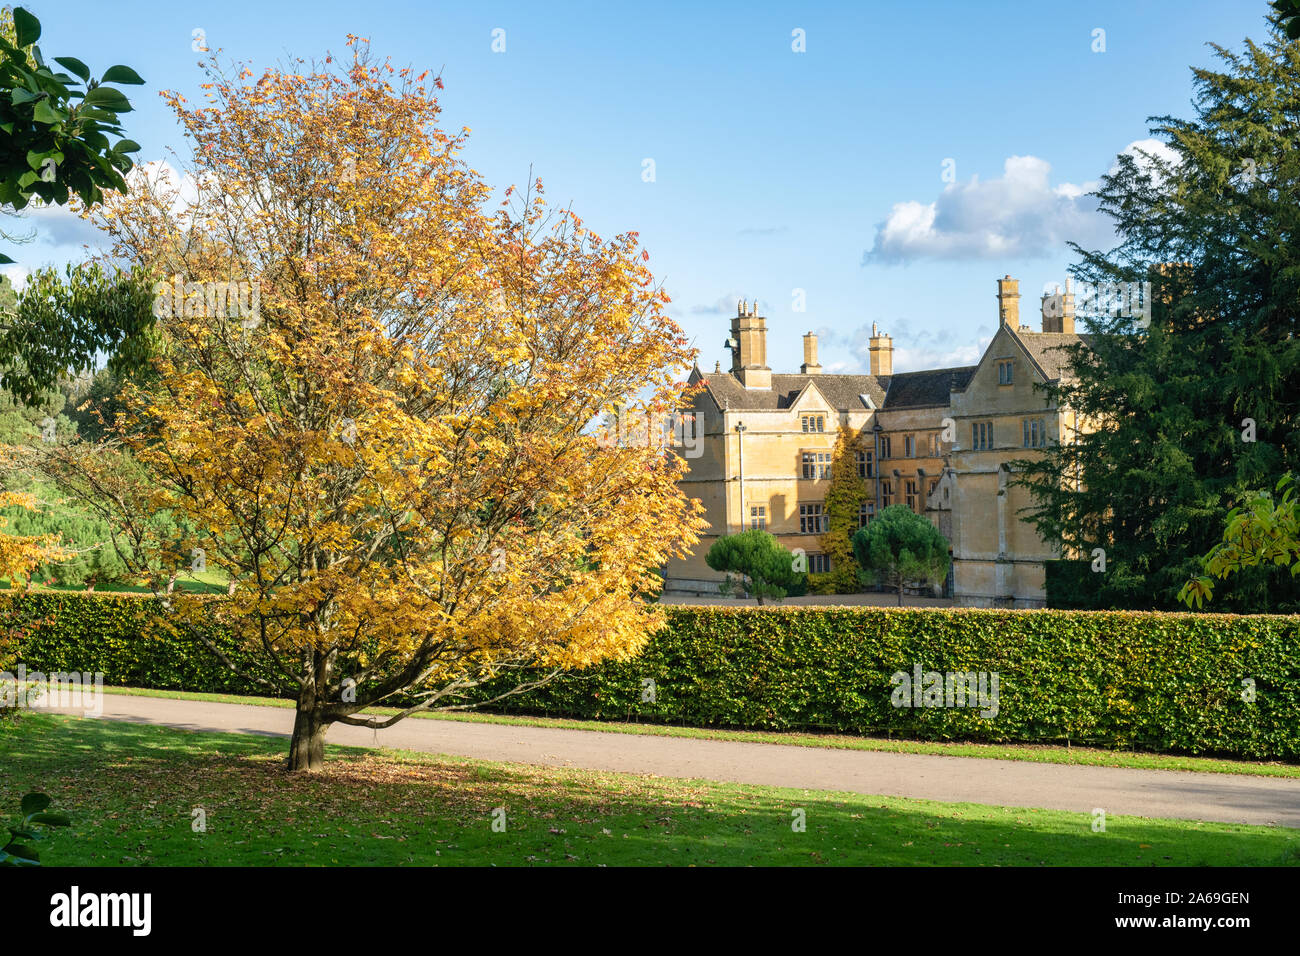 Batsford manor house in the autumn. Batsford, Moreton-in-Marsh, Cotswolds, Gloucestershire, England Stock Photo